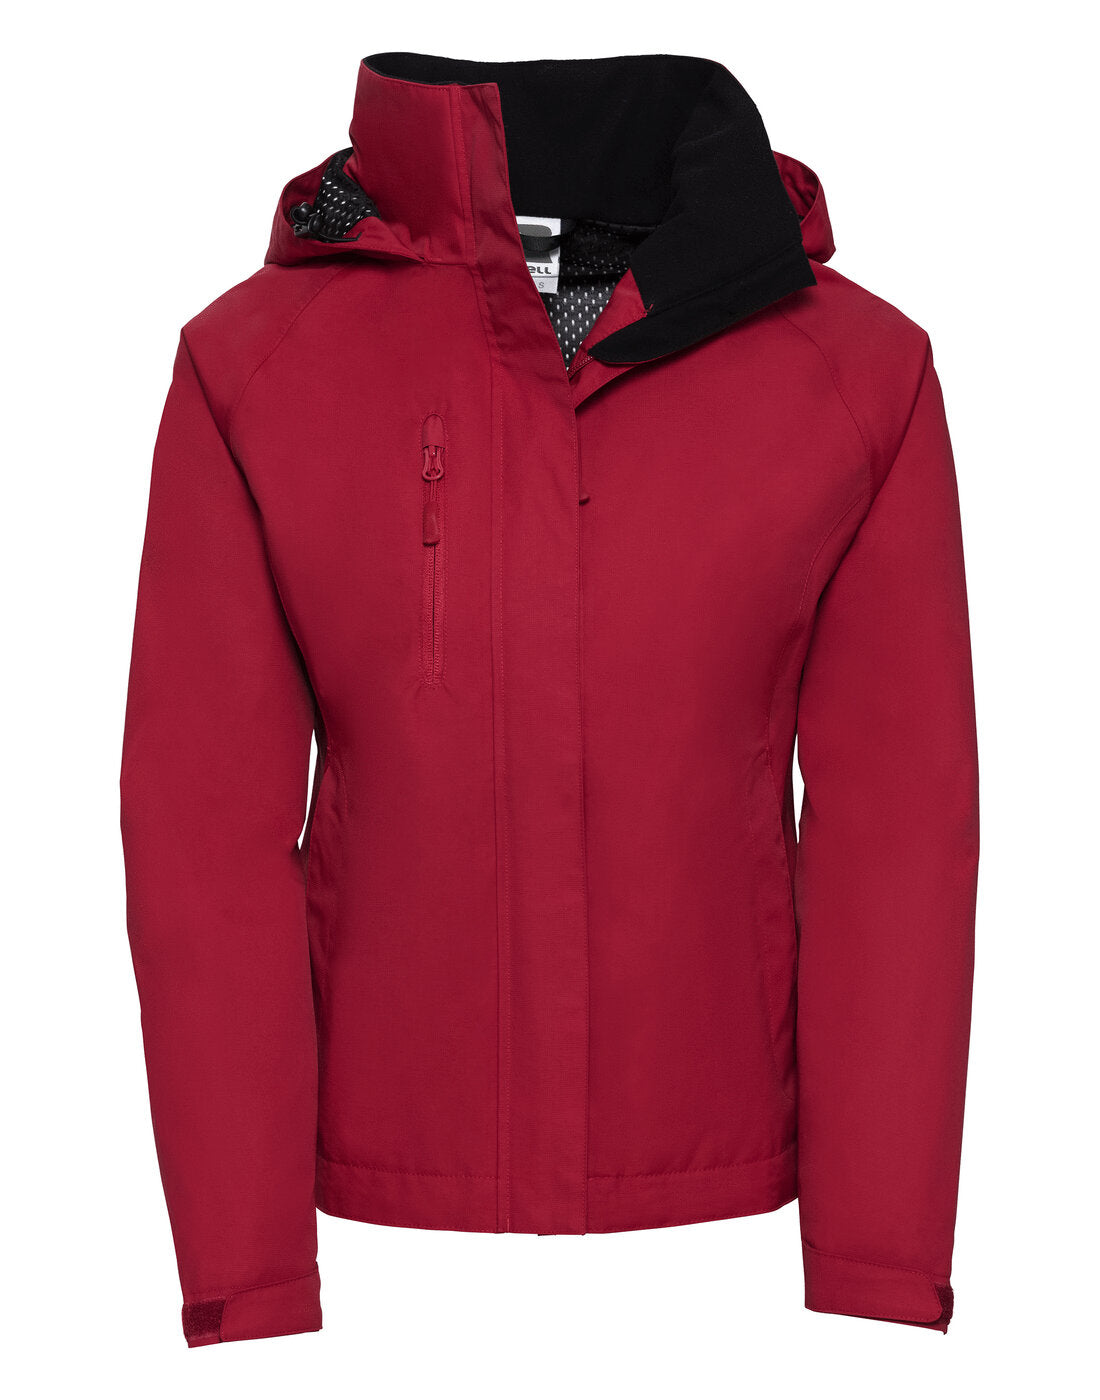 Russell Ladies Hydra Plus 2000 Jacket Classic Red